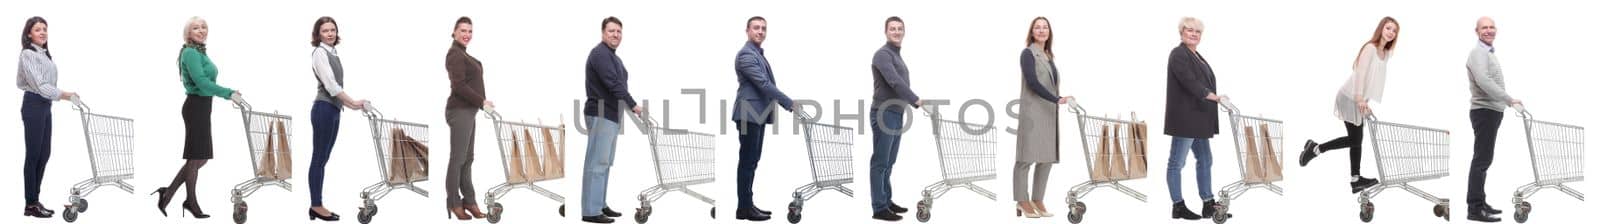 group of people with cart looking at camera isolated on white background